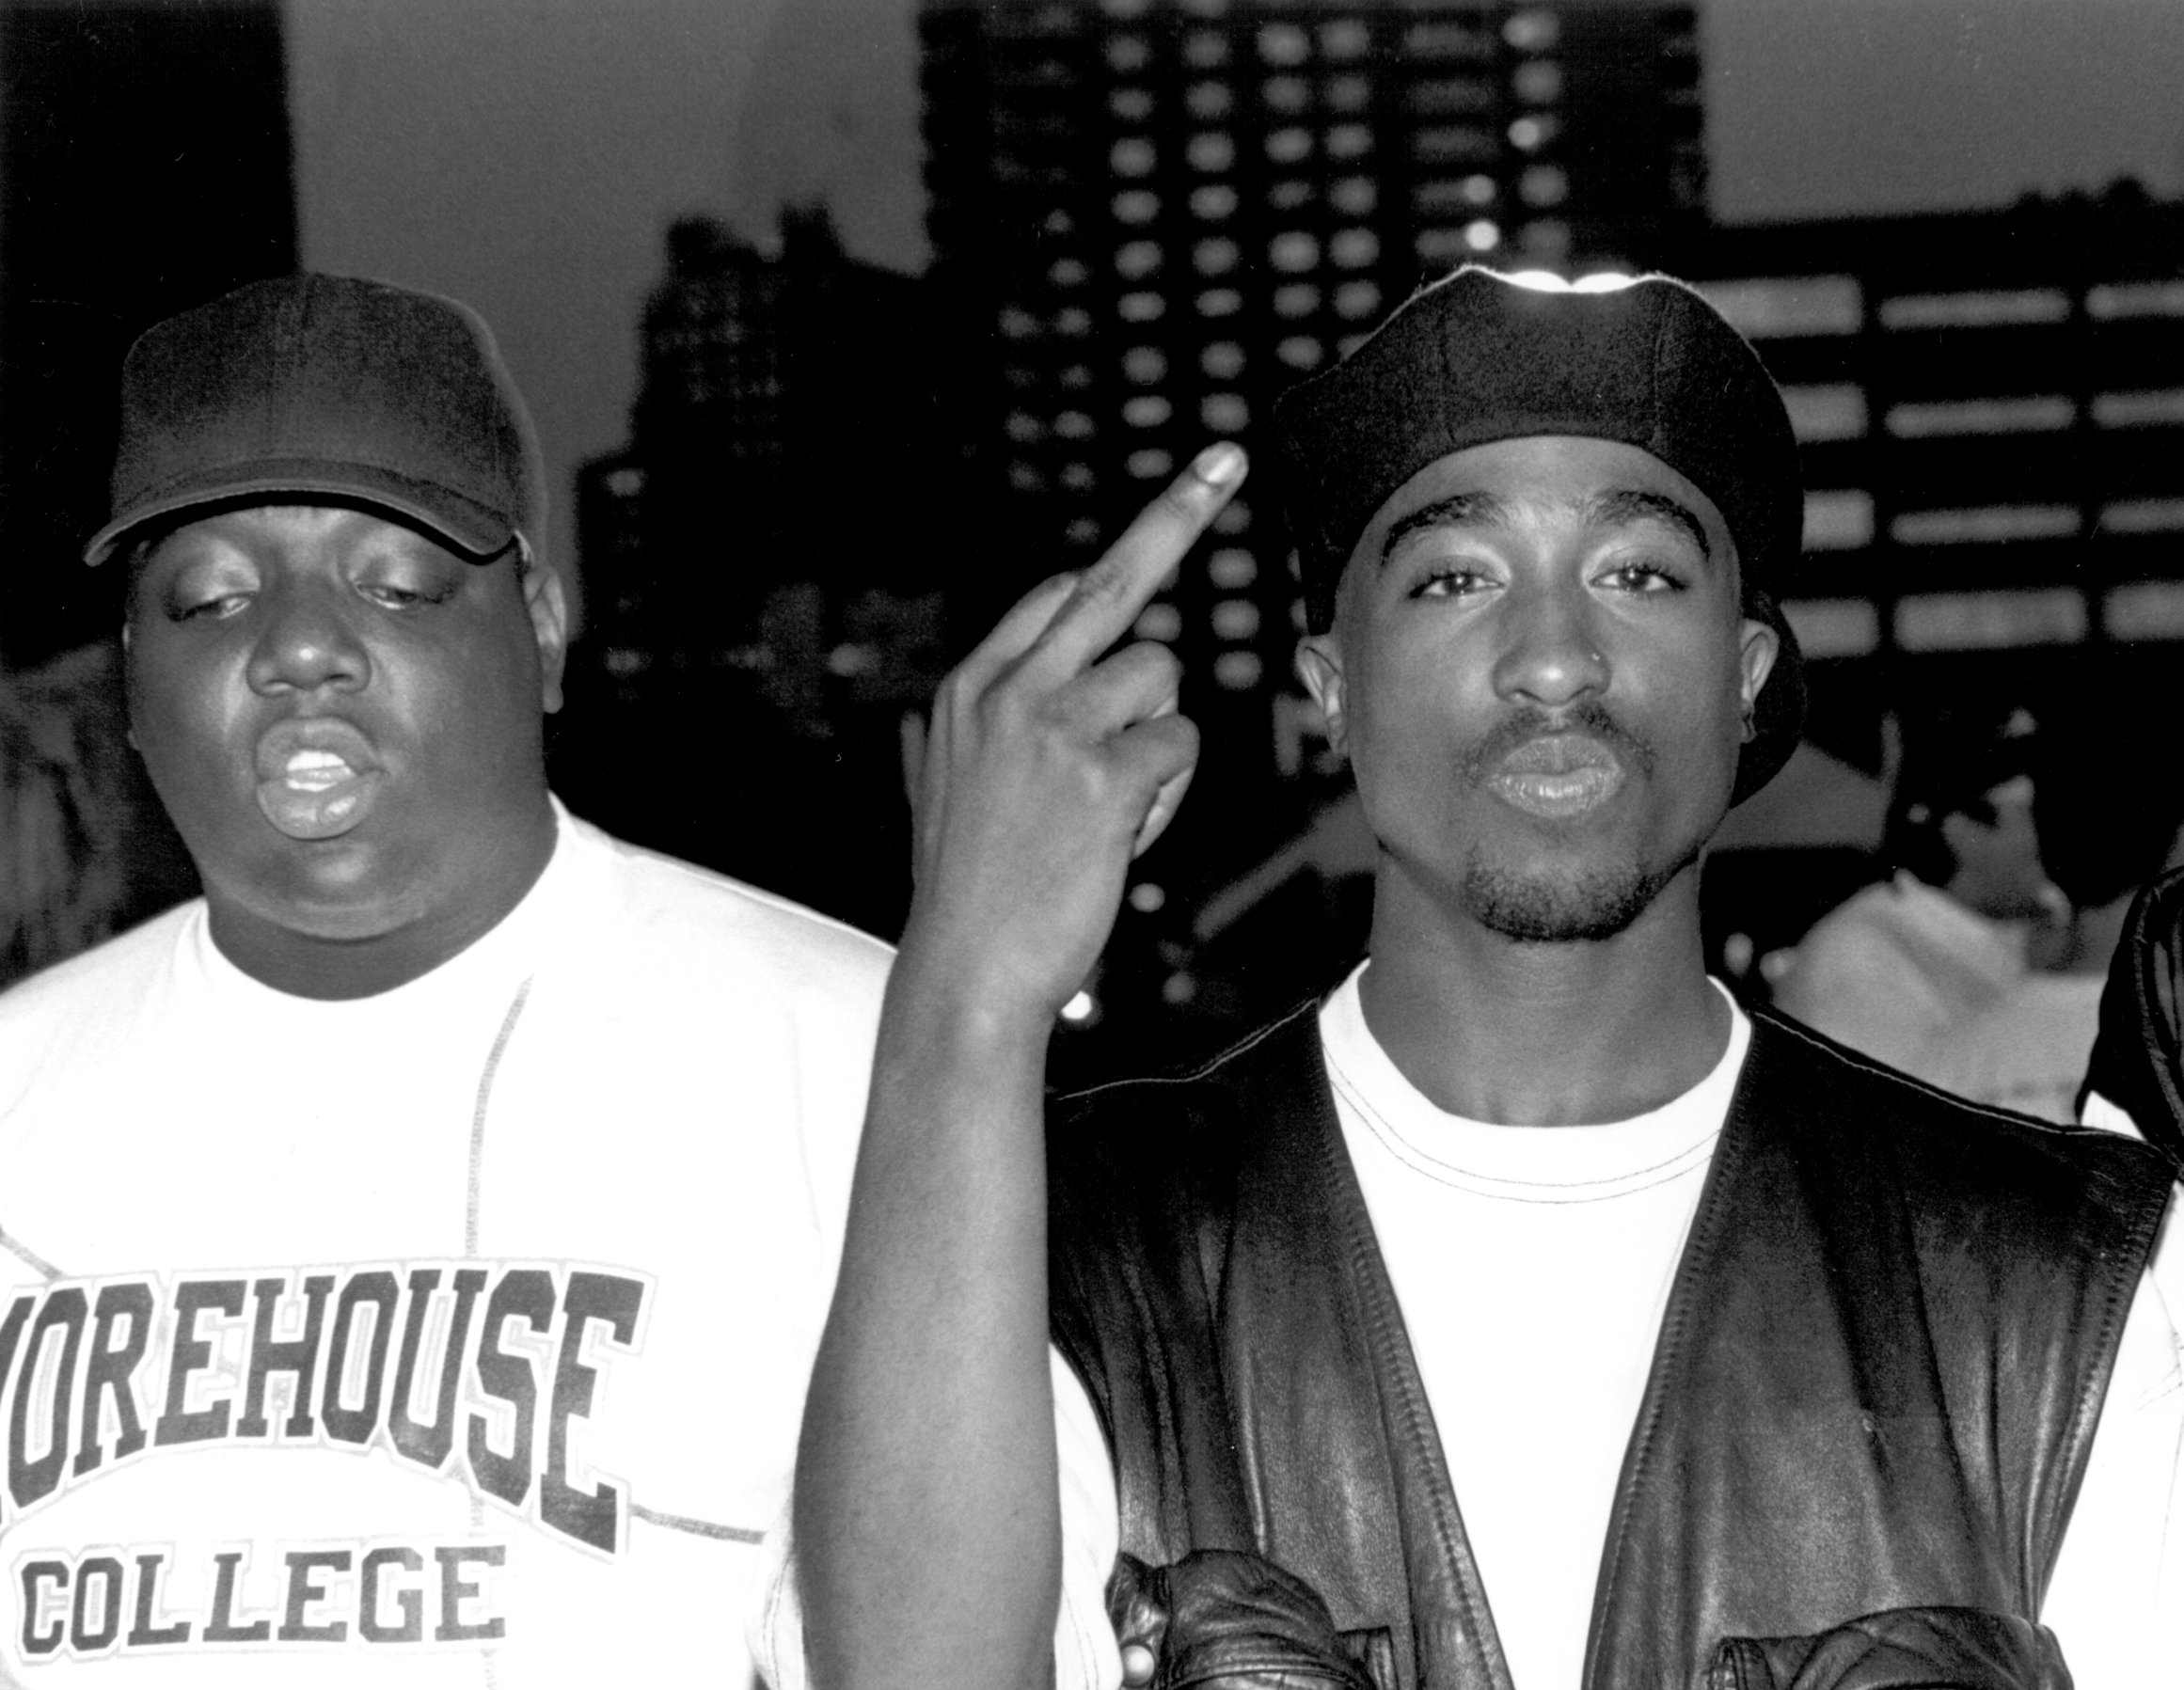 (L-R) The Notorious B.I.G. and Tupac Shakur